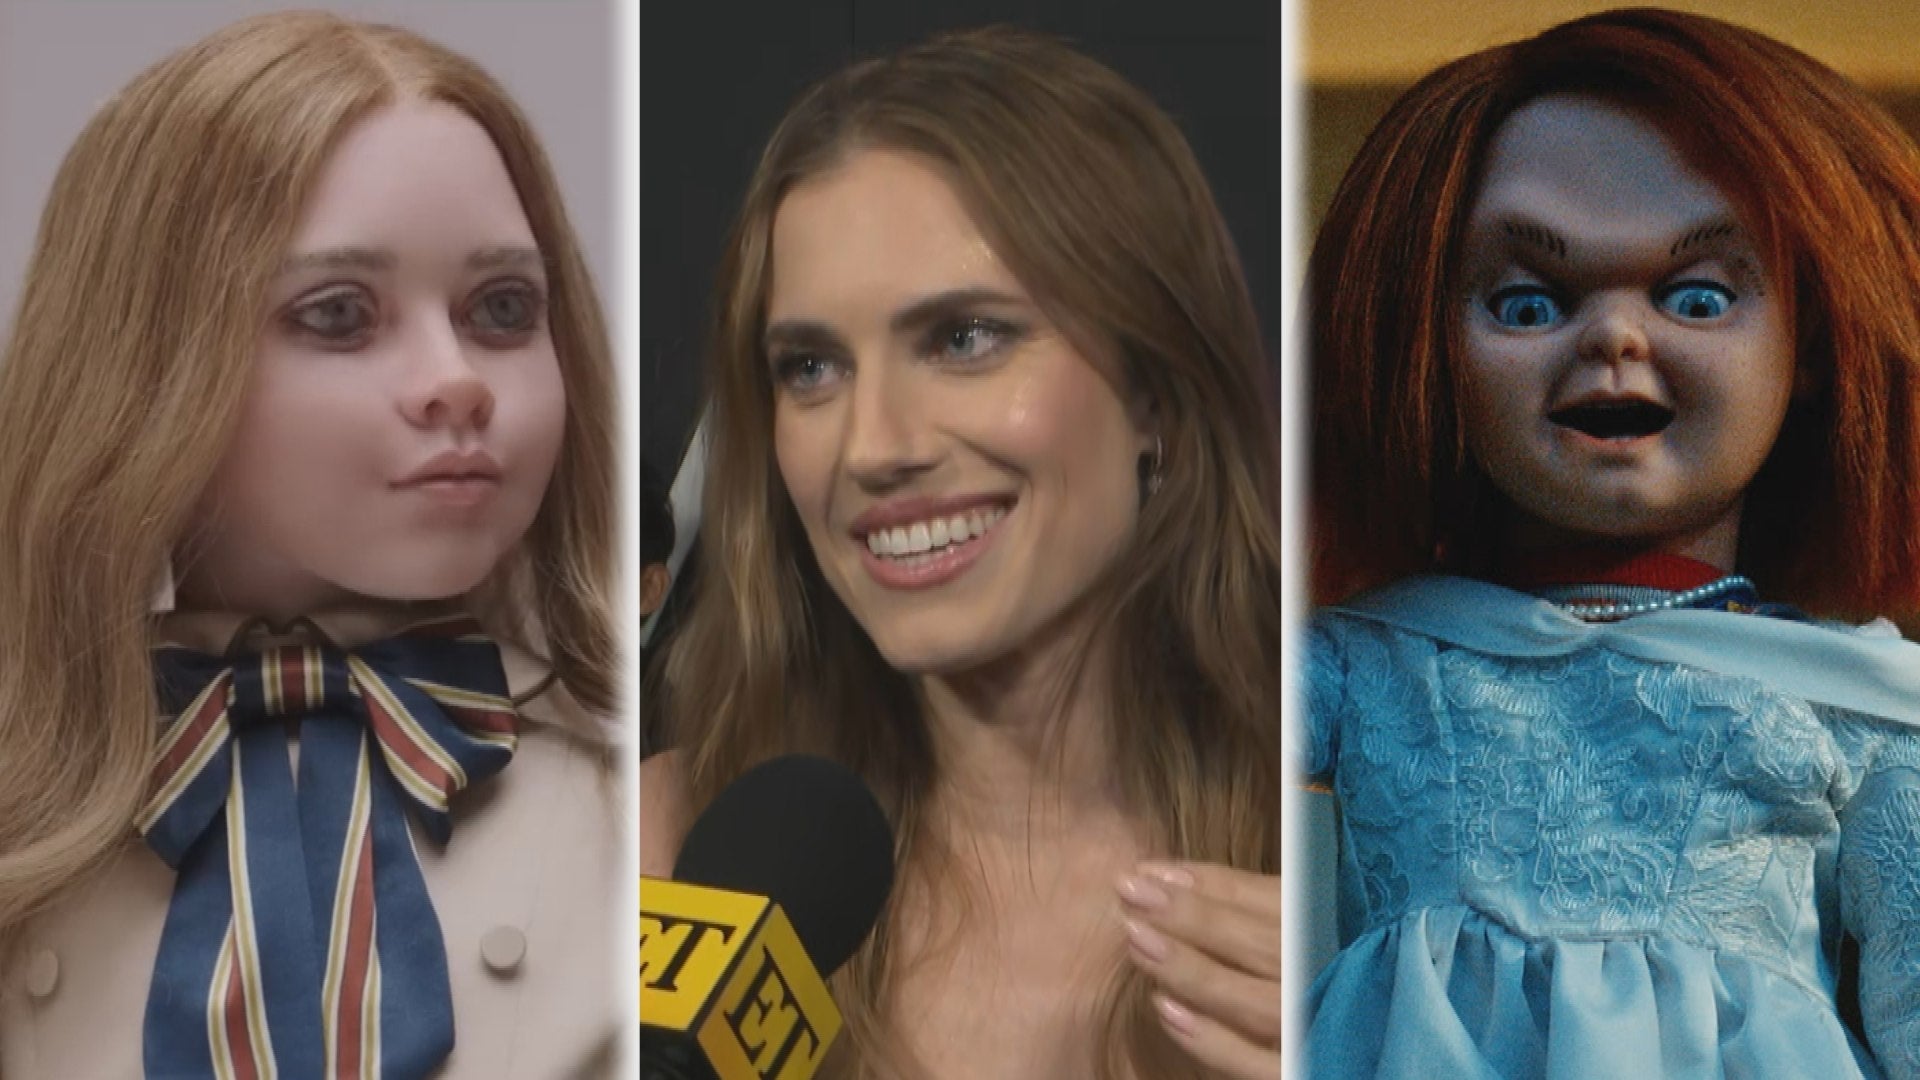 Allison Williams on M3GAN and Chucky’s Twitter Beef (Exclusive) 